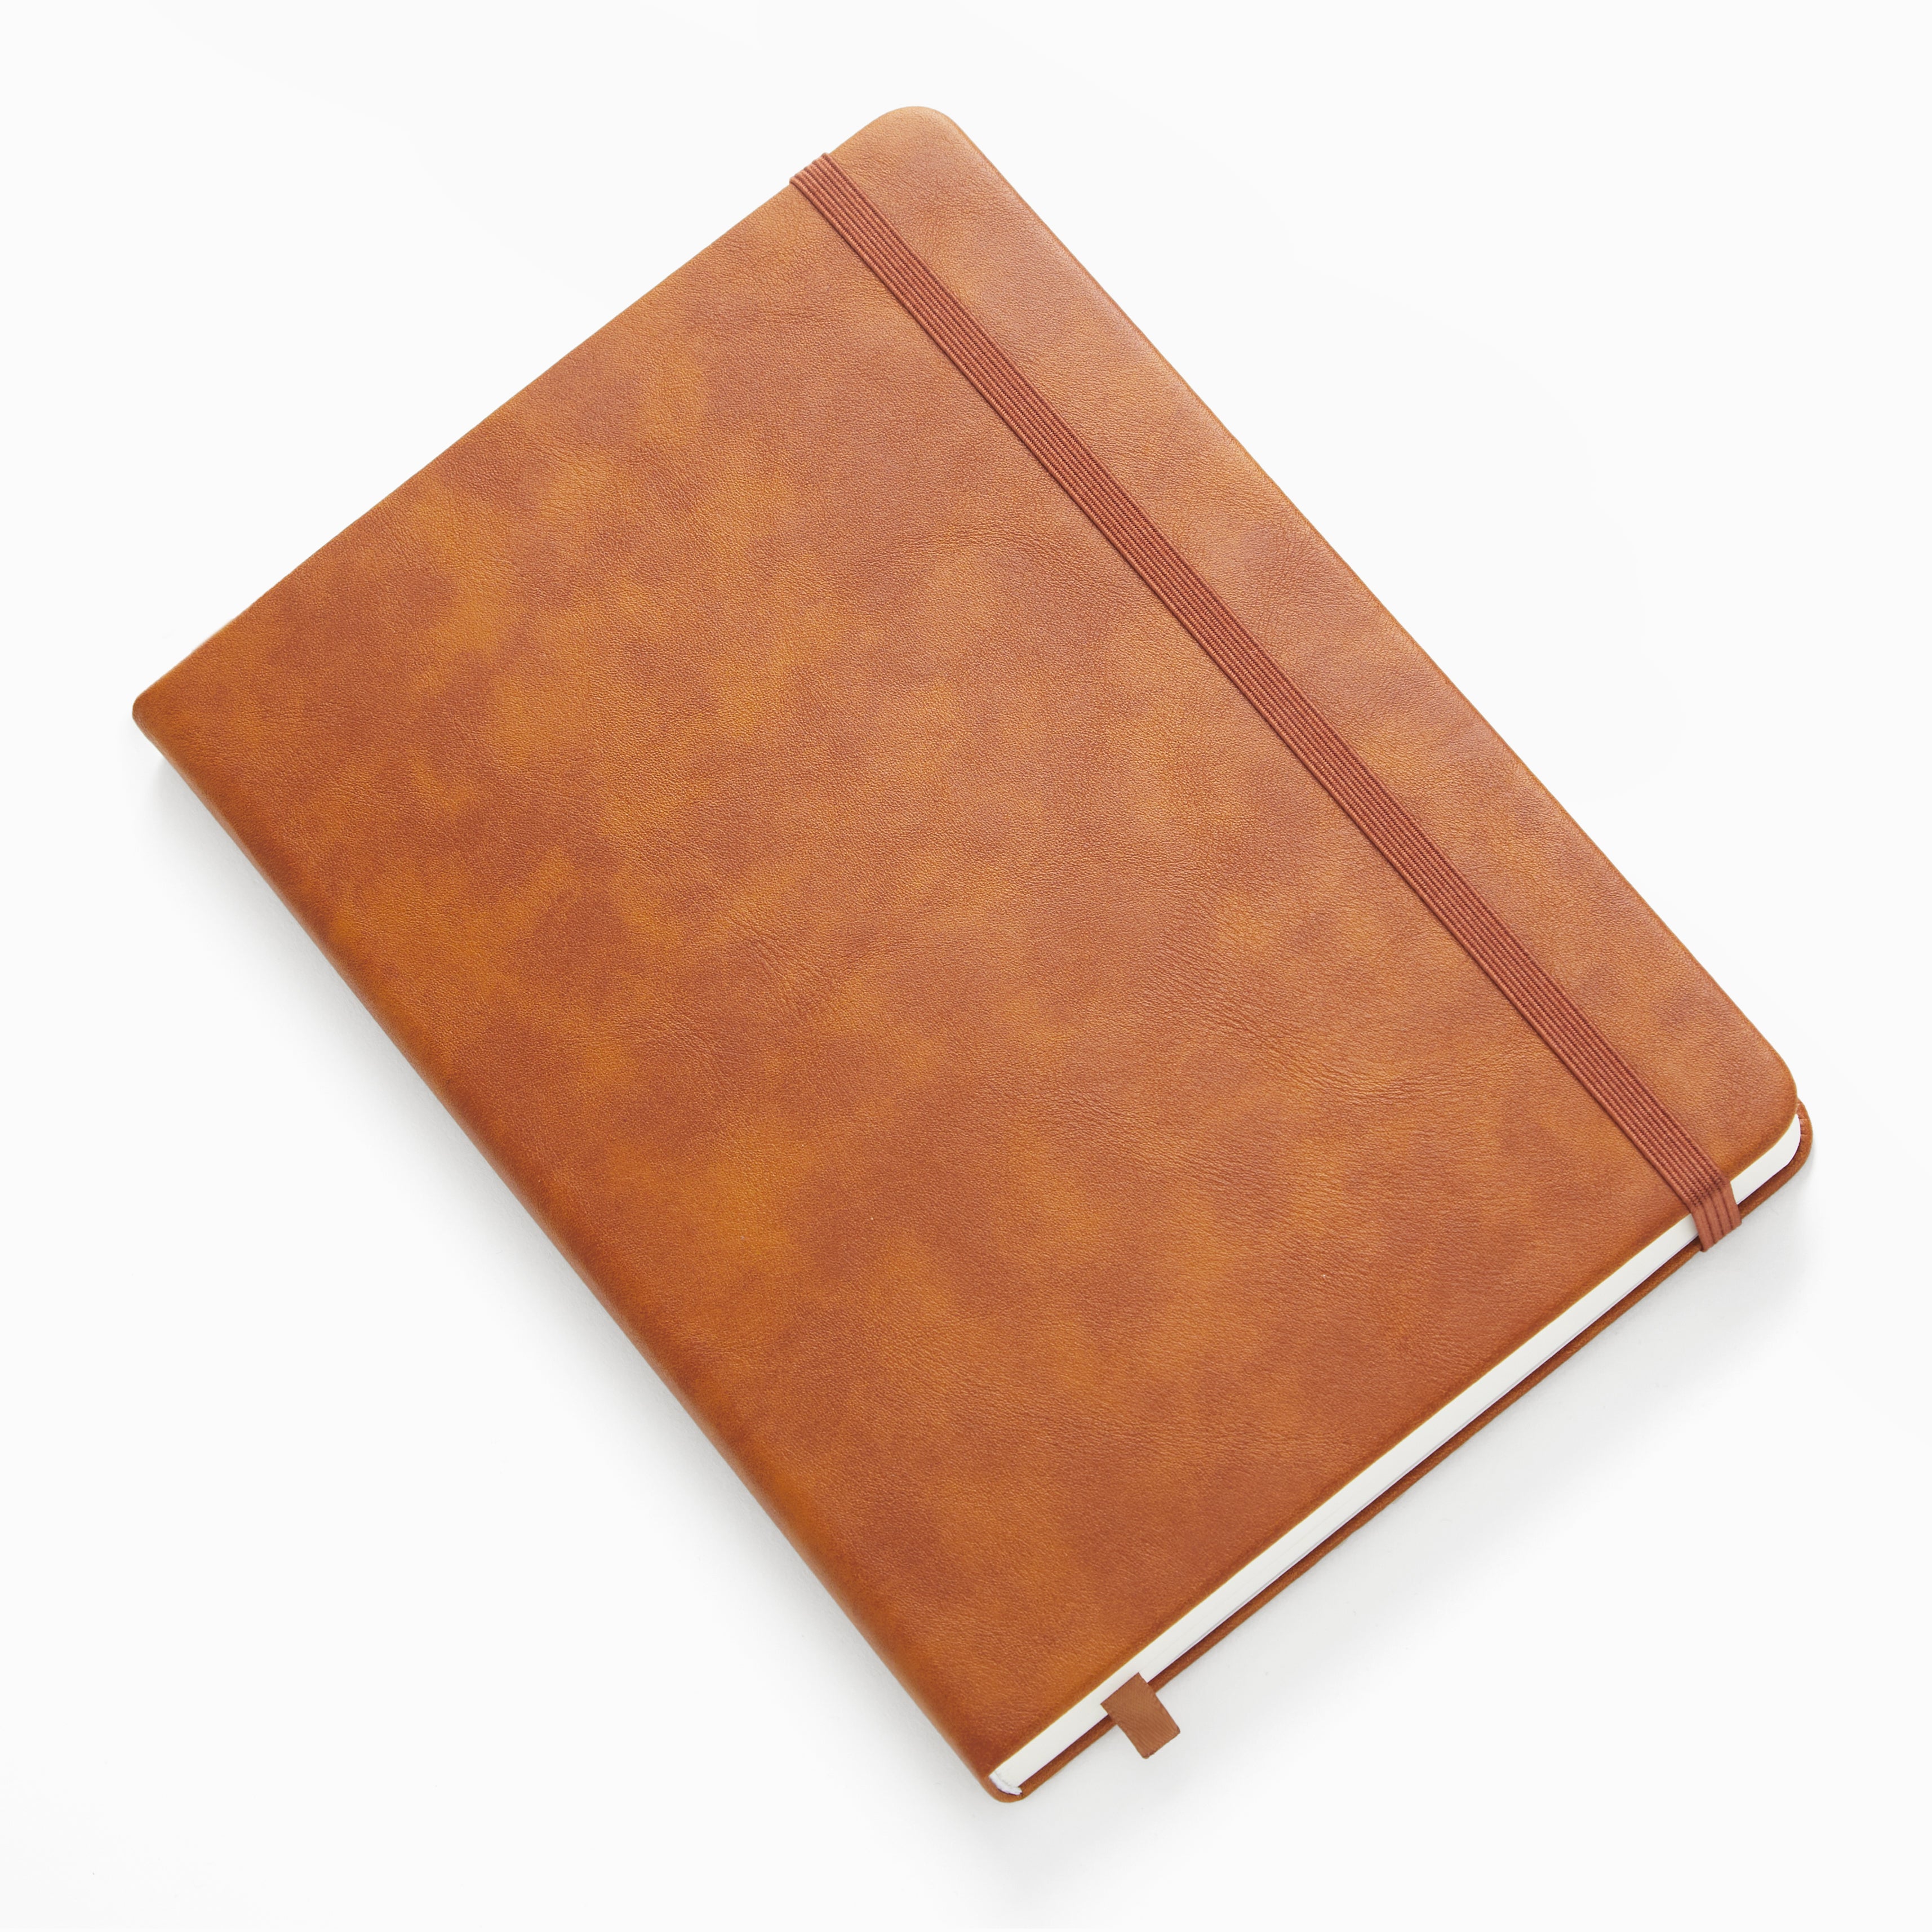 Why Every Man Needs a Leather Planner